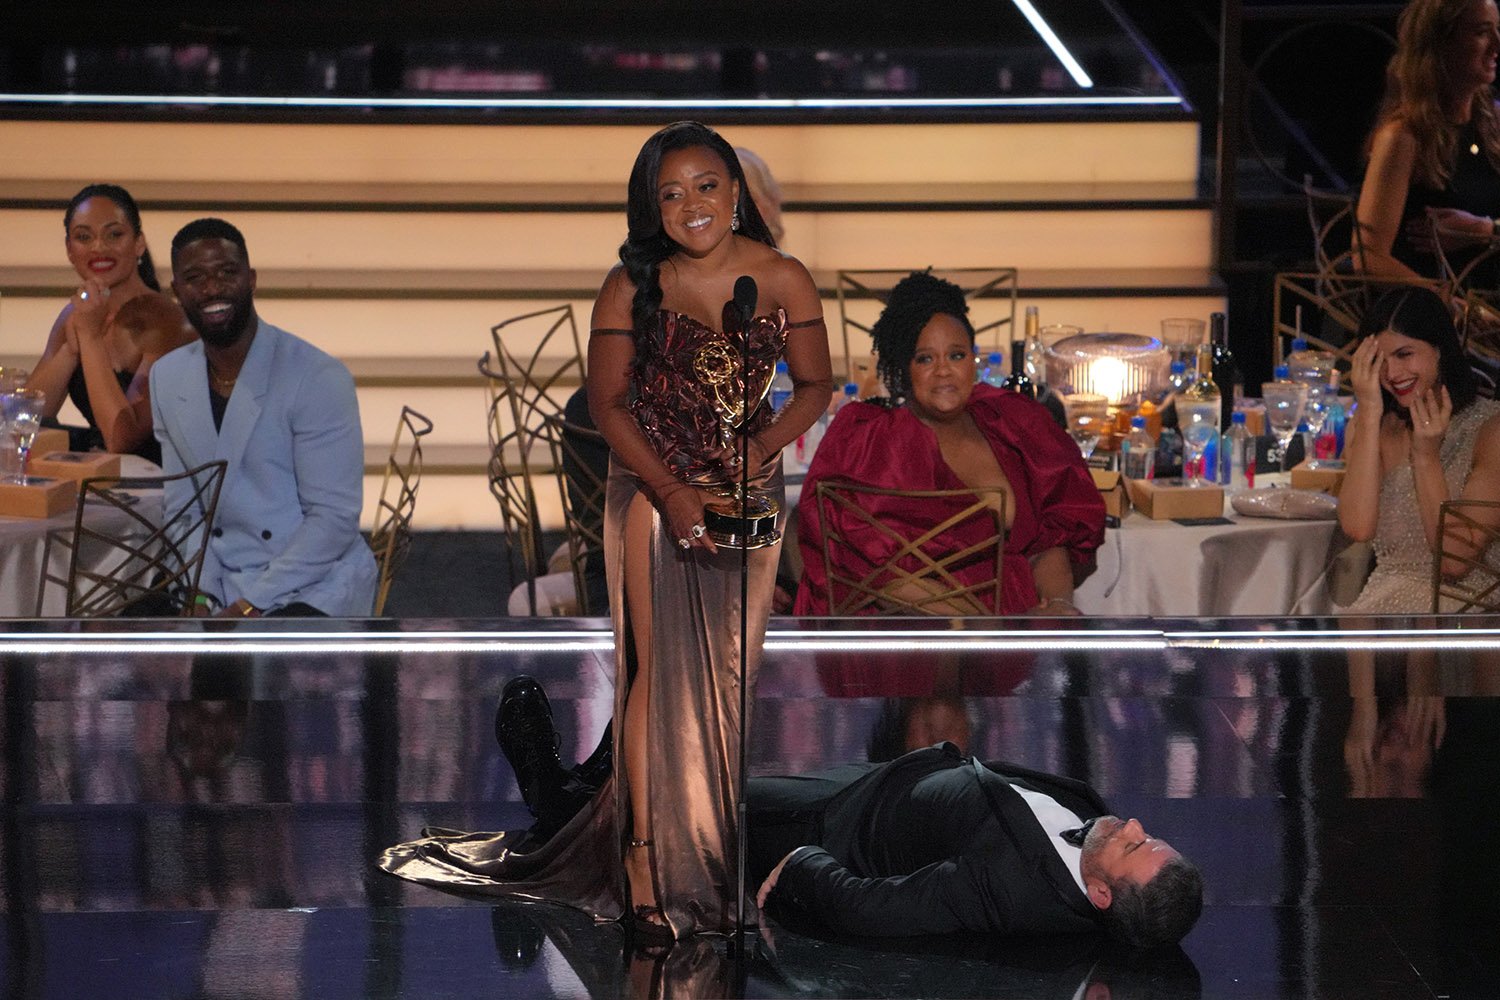 Quinta Brunson accepts her award at the Emmys 2022 as Jimmy Kimmel pretends to be passed out on stage beside her.